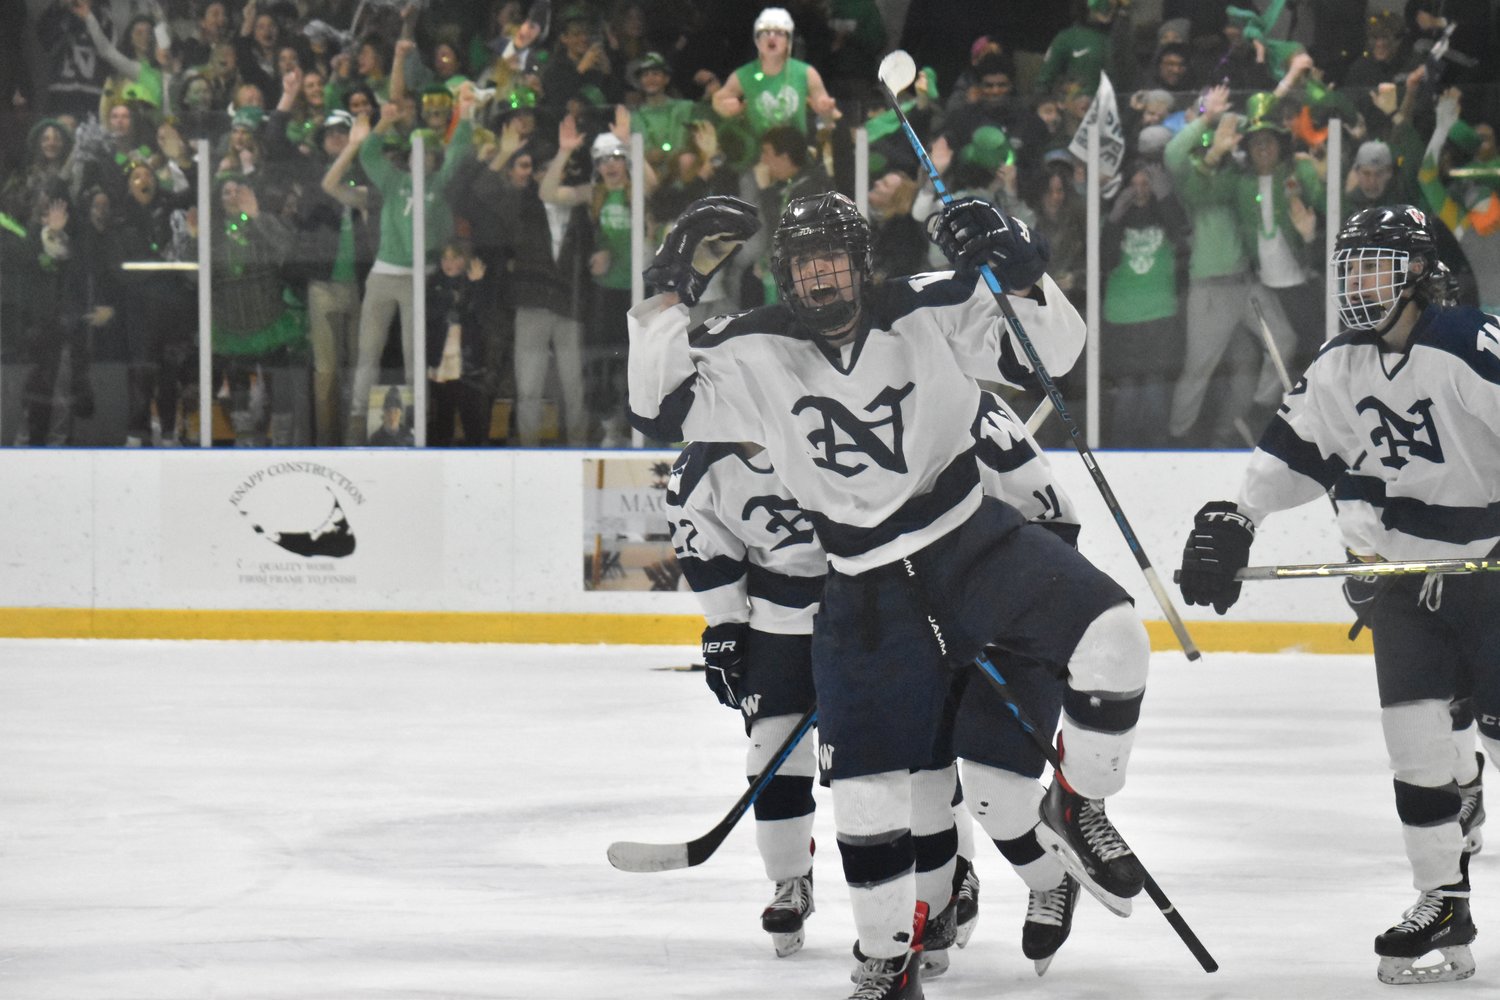 Ryan Davis celebrates after his second-period goal last Thursday against Amesbury in a 2-0 quarterfinal victory.